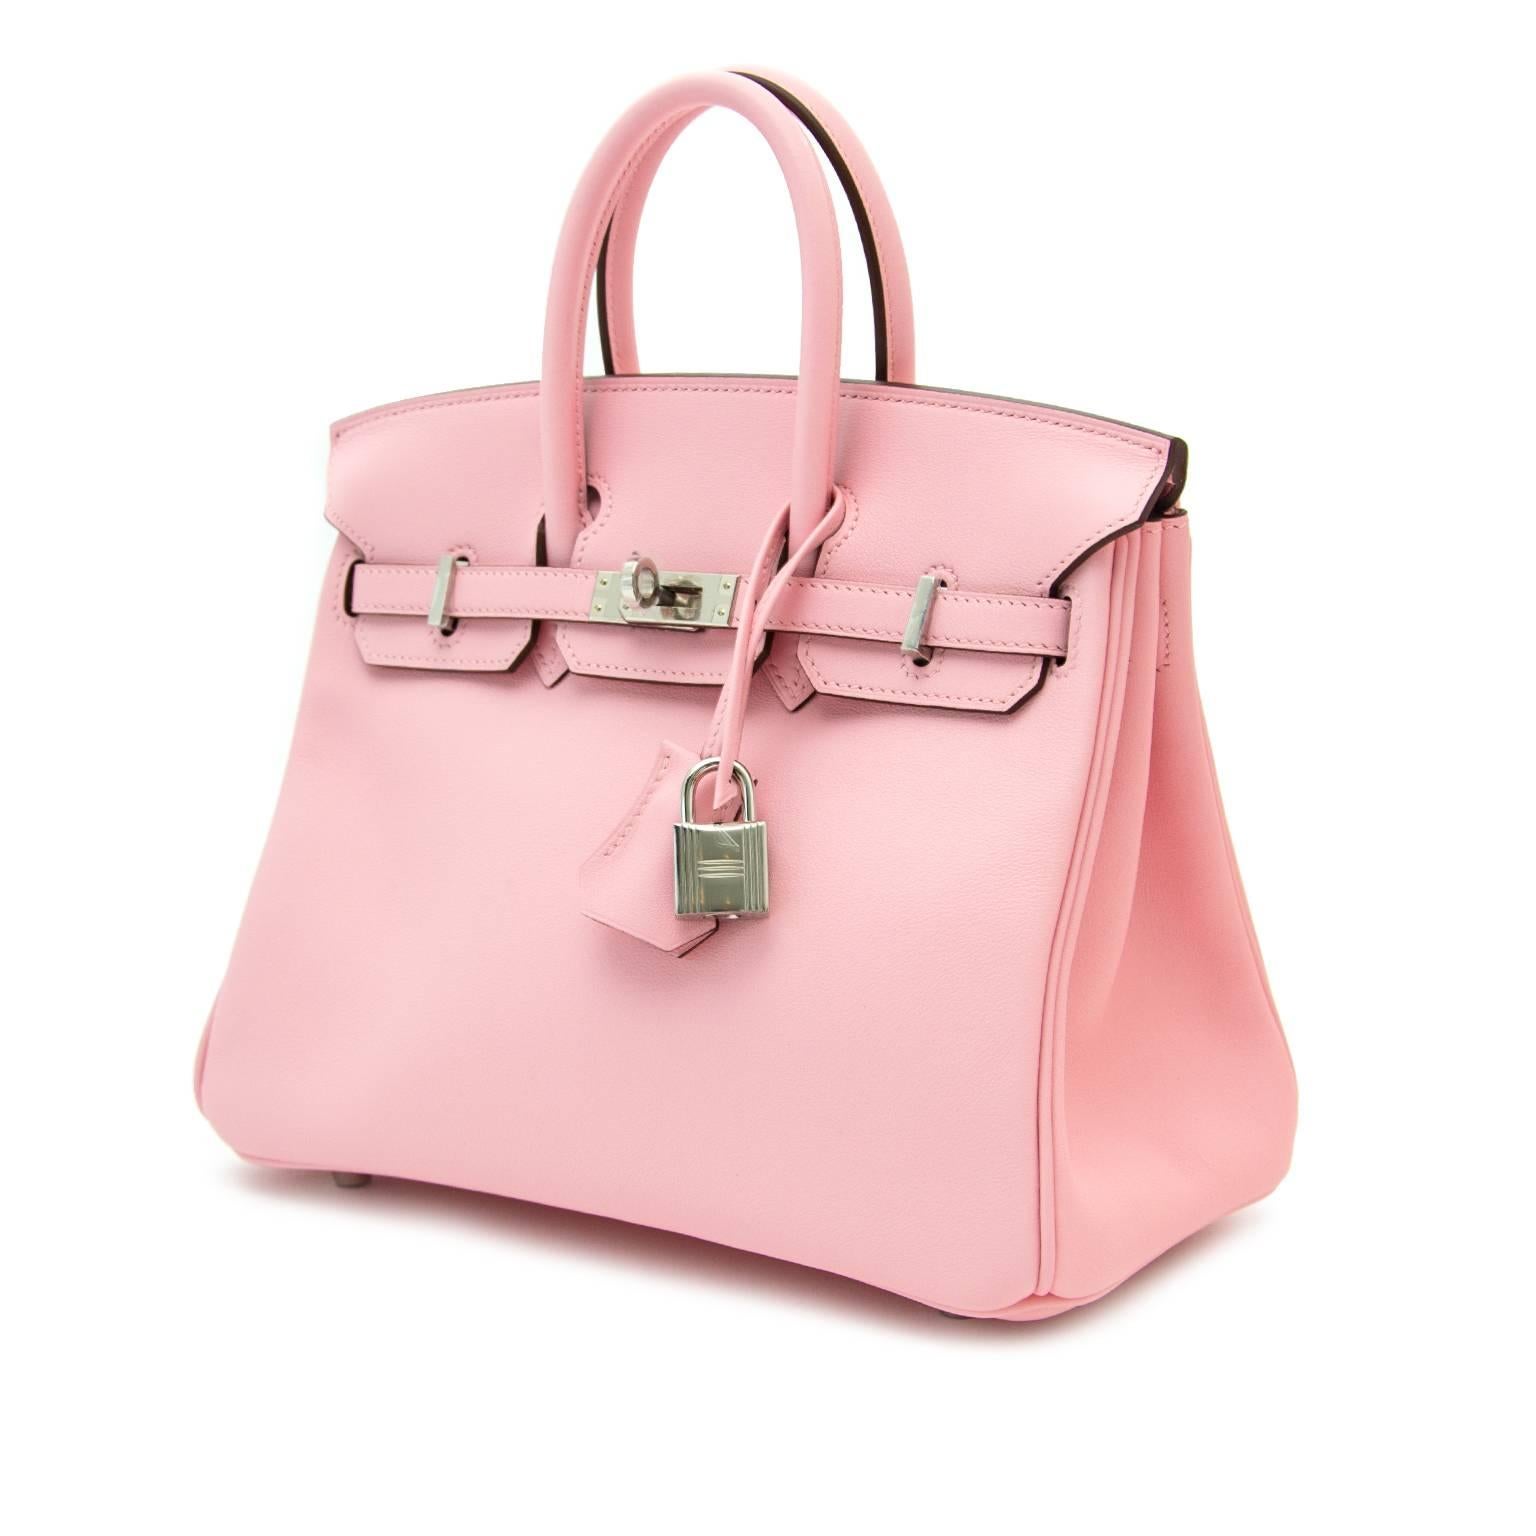 RARE & Brand New Hermes Birkin rose sakura 25, never worn!
A rare find, for real collectors.
This beauty comes in swift leather with PHW.
It is very hard to find a Birkin in size 25cm.
X stamp